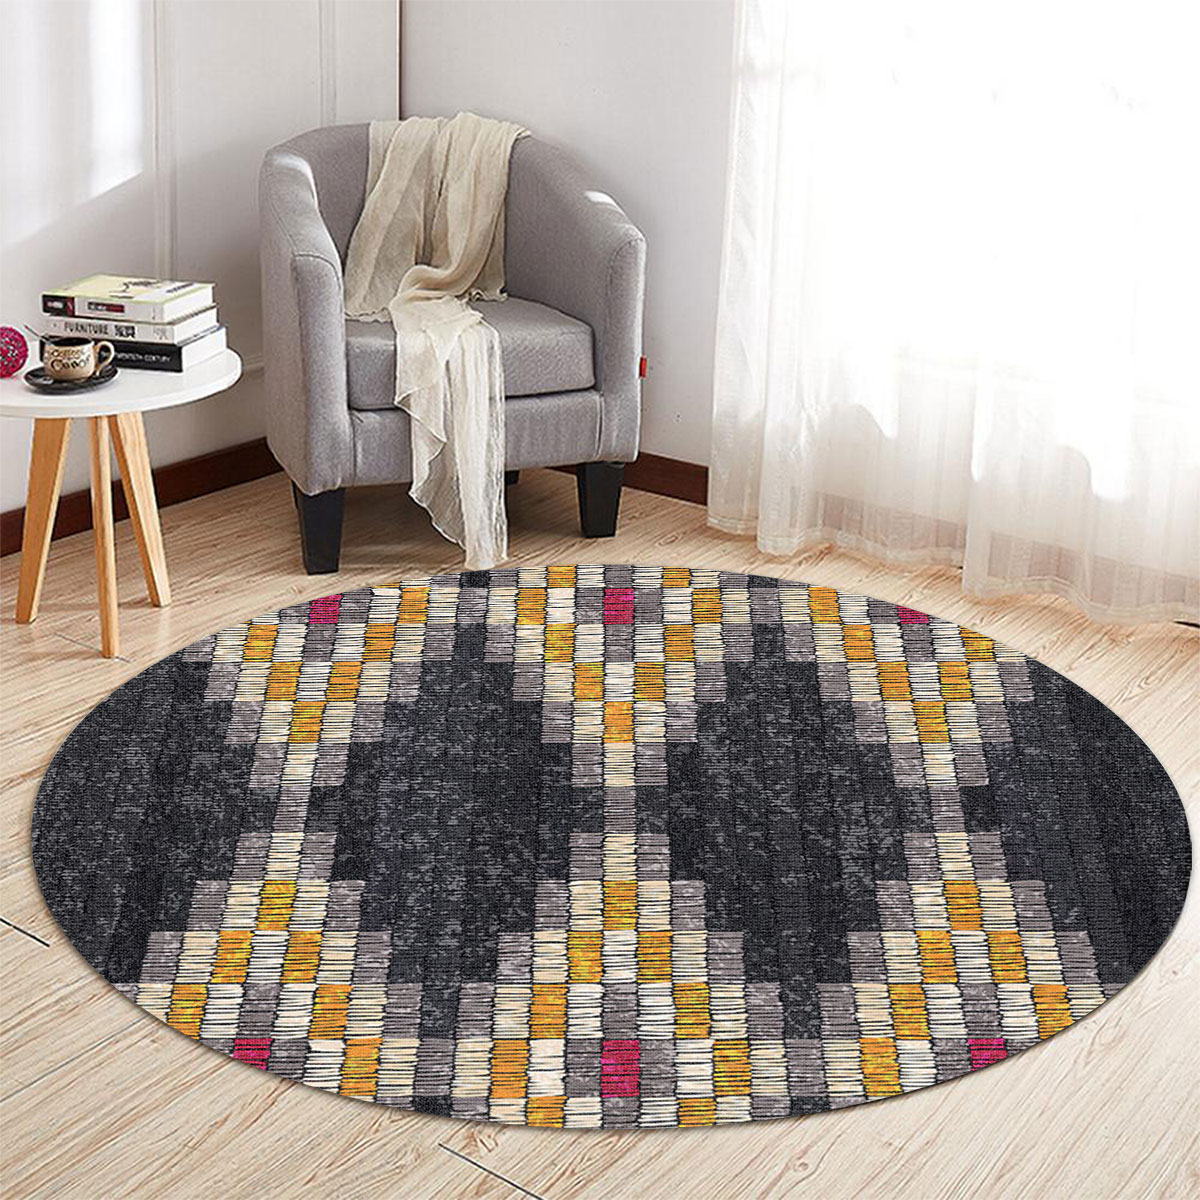 Embroidered Bohemian Style Round Carpet